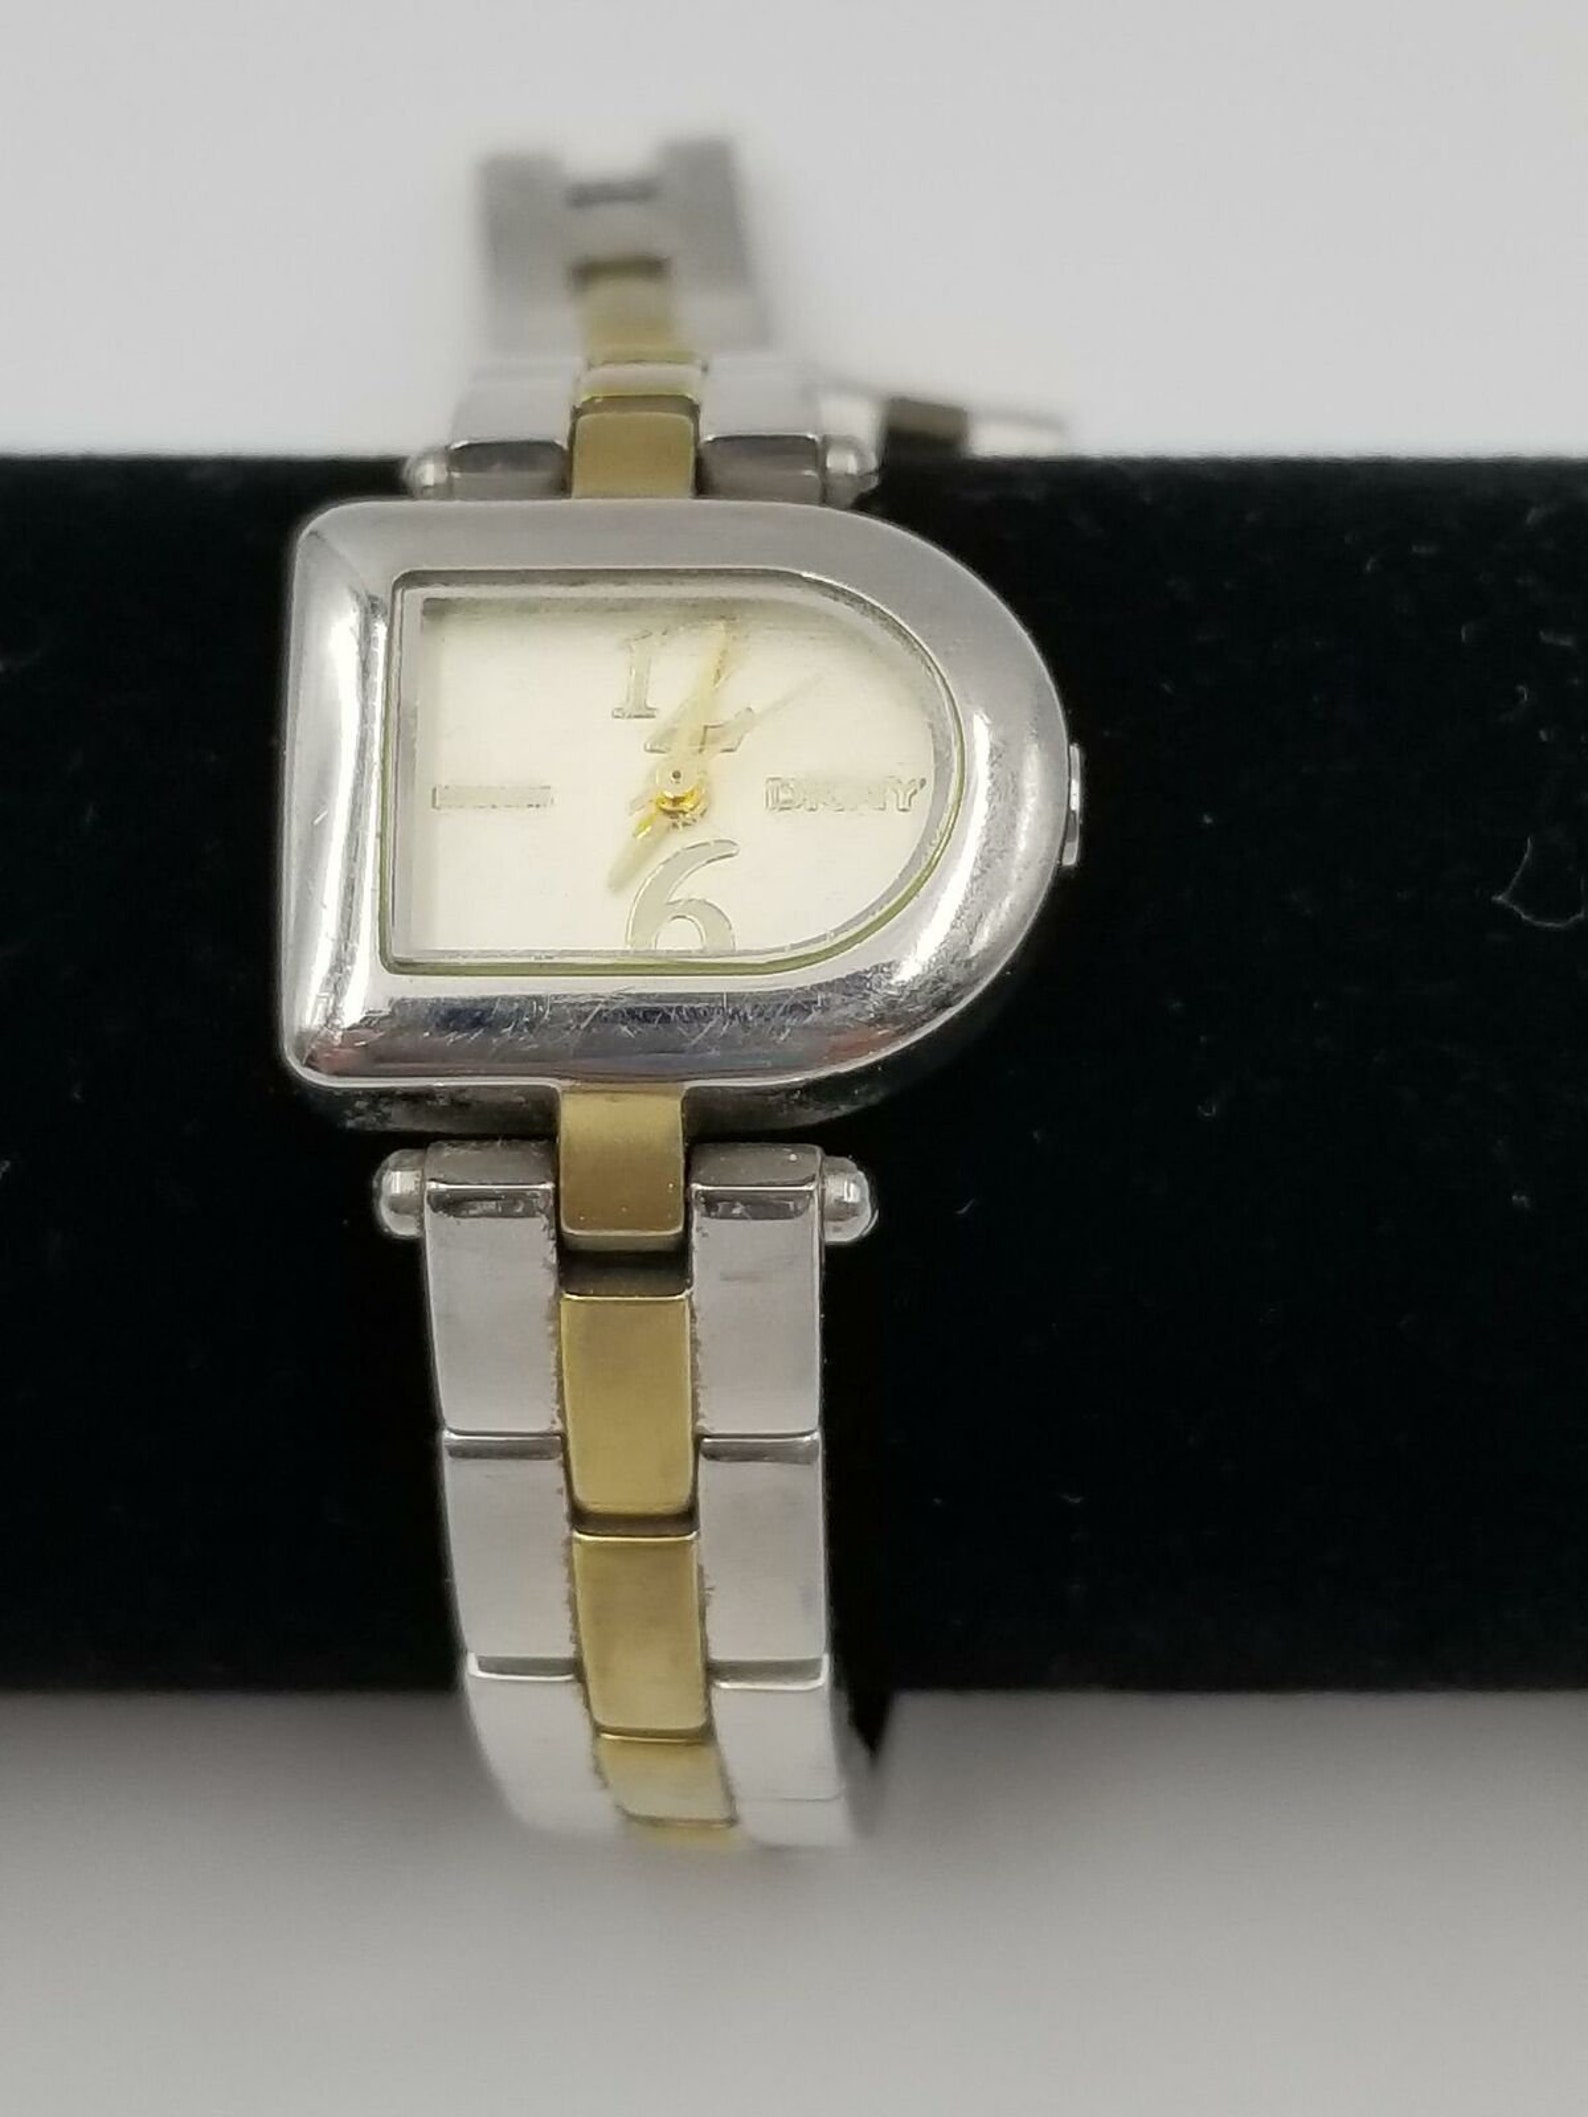 Vintage DKNY Ladies Watch Silver D Shape Face Stainless Steel | Etsy